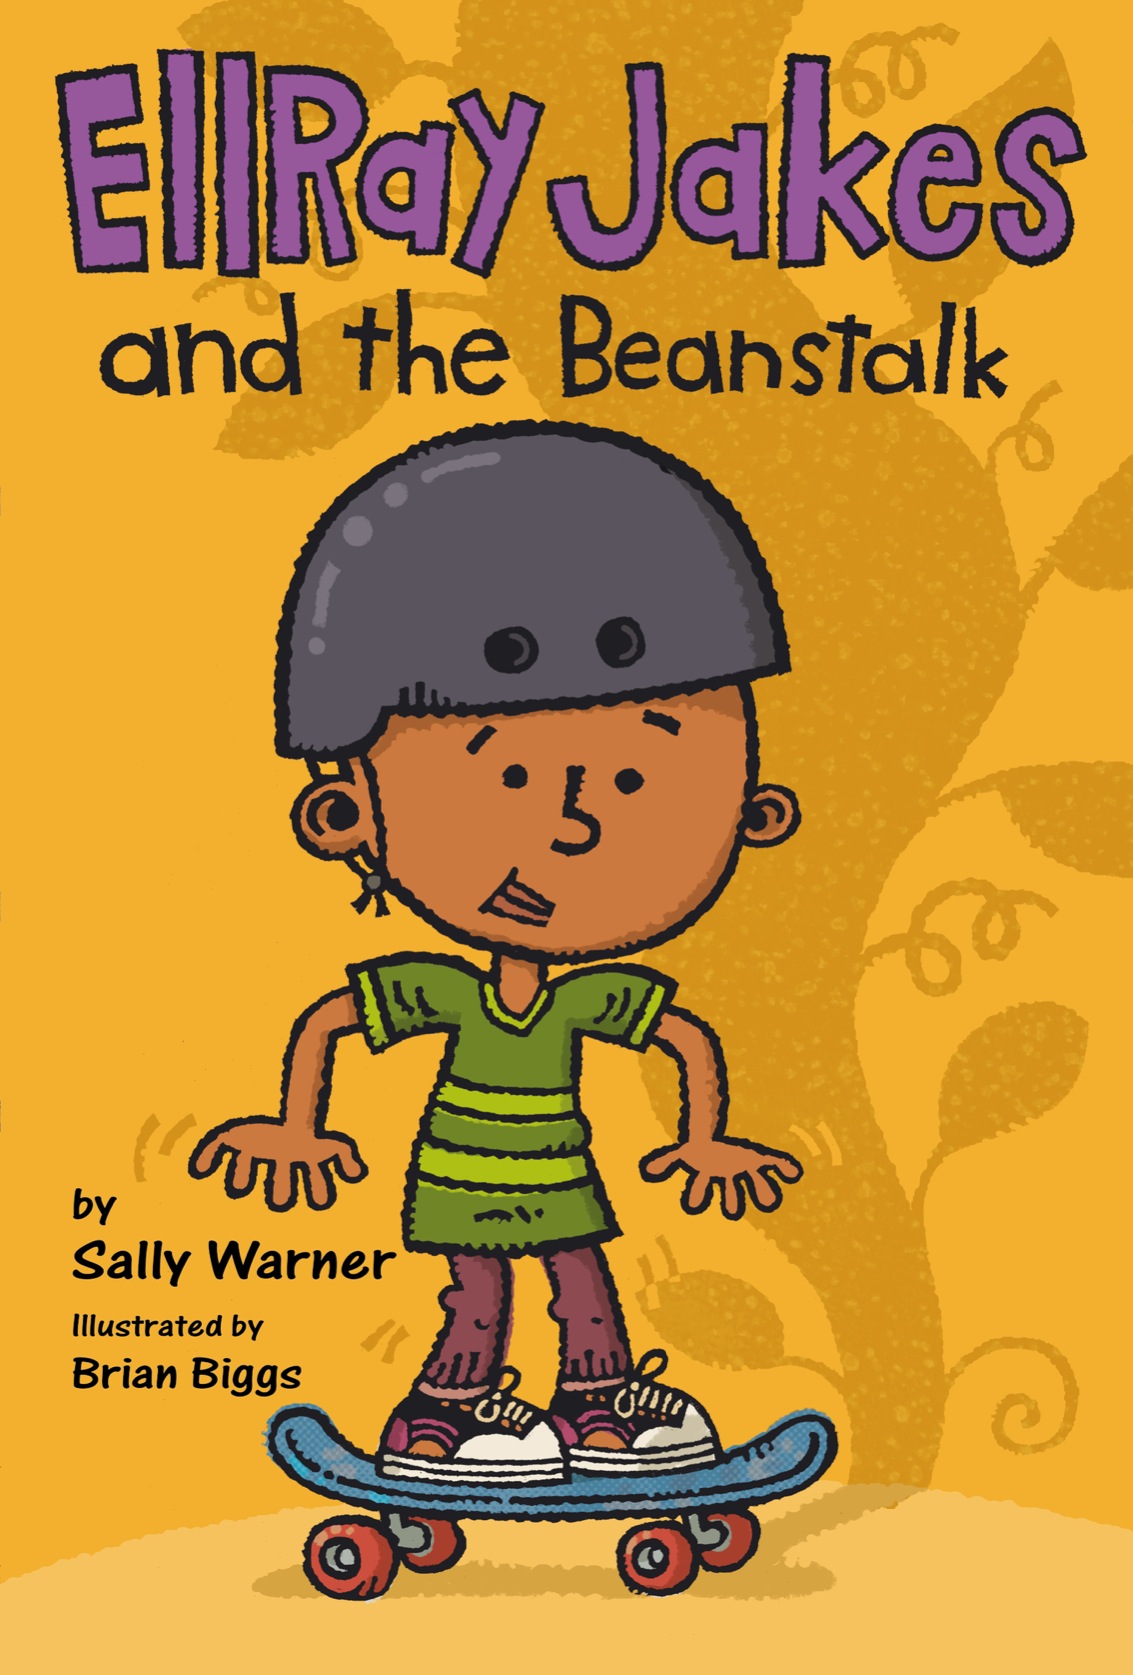 EllRay Jakes and the Beanstalk (2013) by Sally Warner